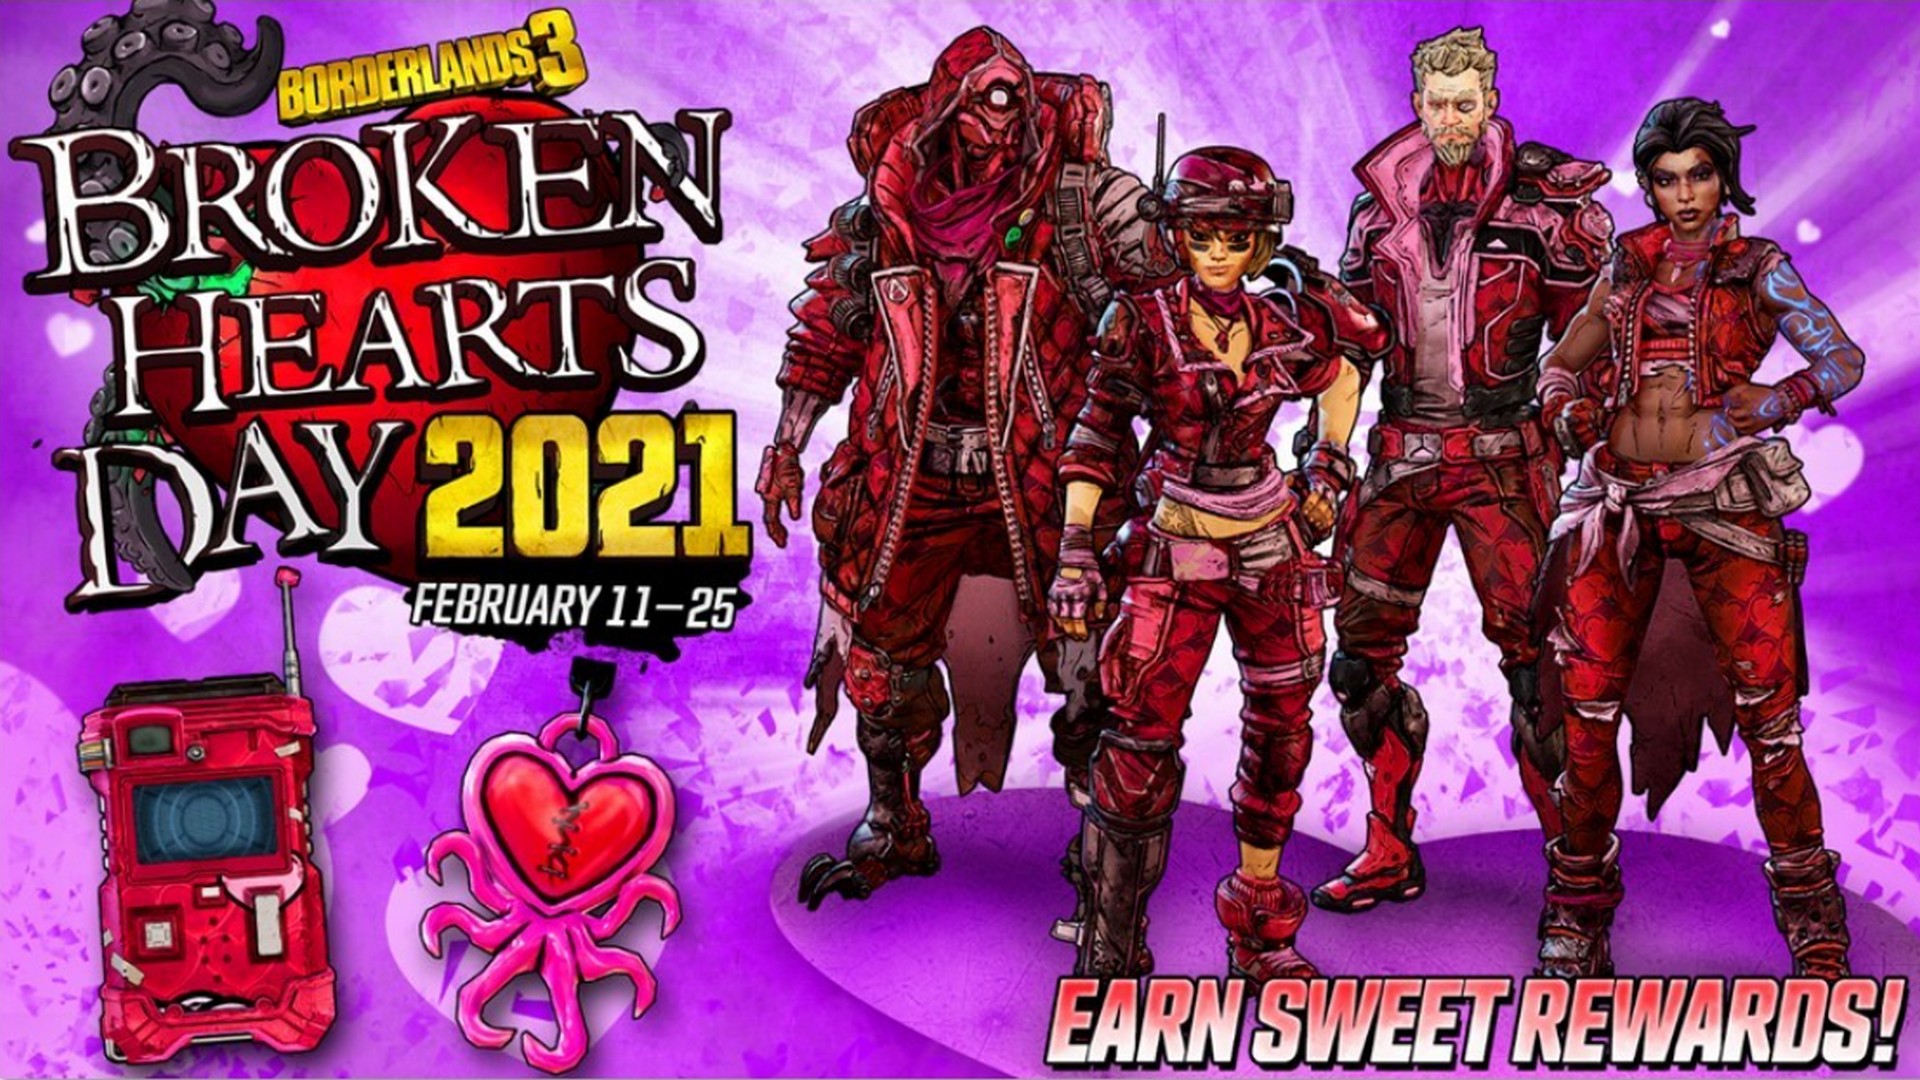 Borderlands 3’s Broken Hearts Day Event Begins; Special Limited-Time Discounts on Select Digital Editions Continue